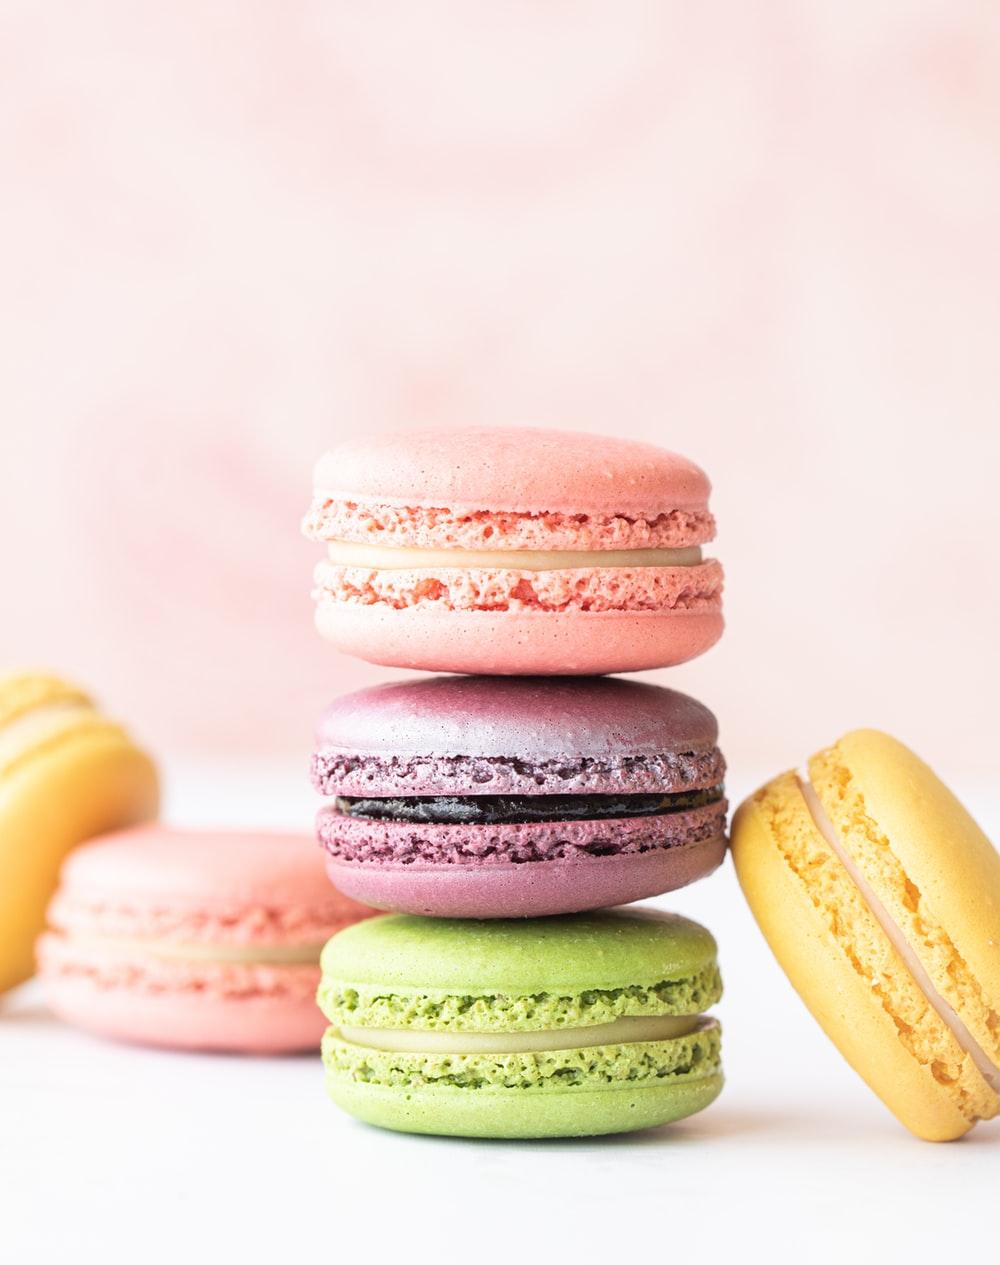 Macaron Picture [HD]. Download Free Image